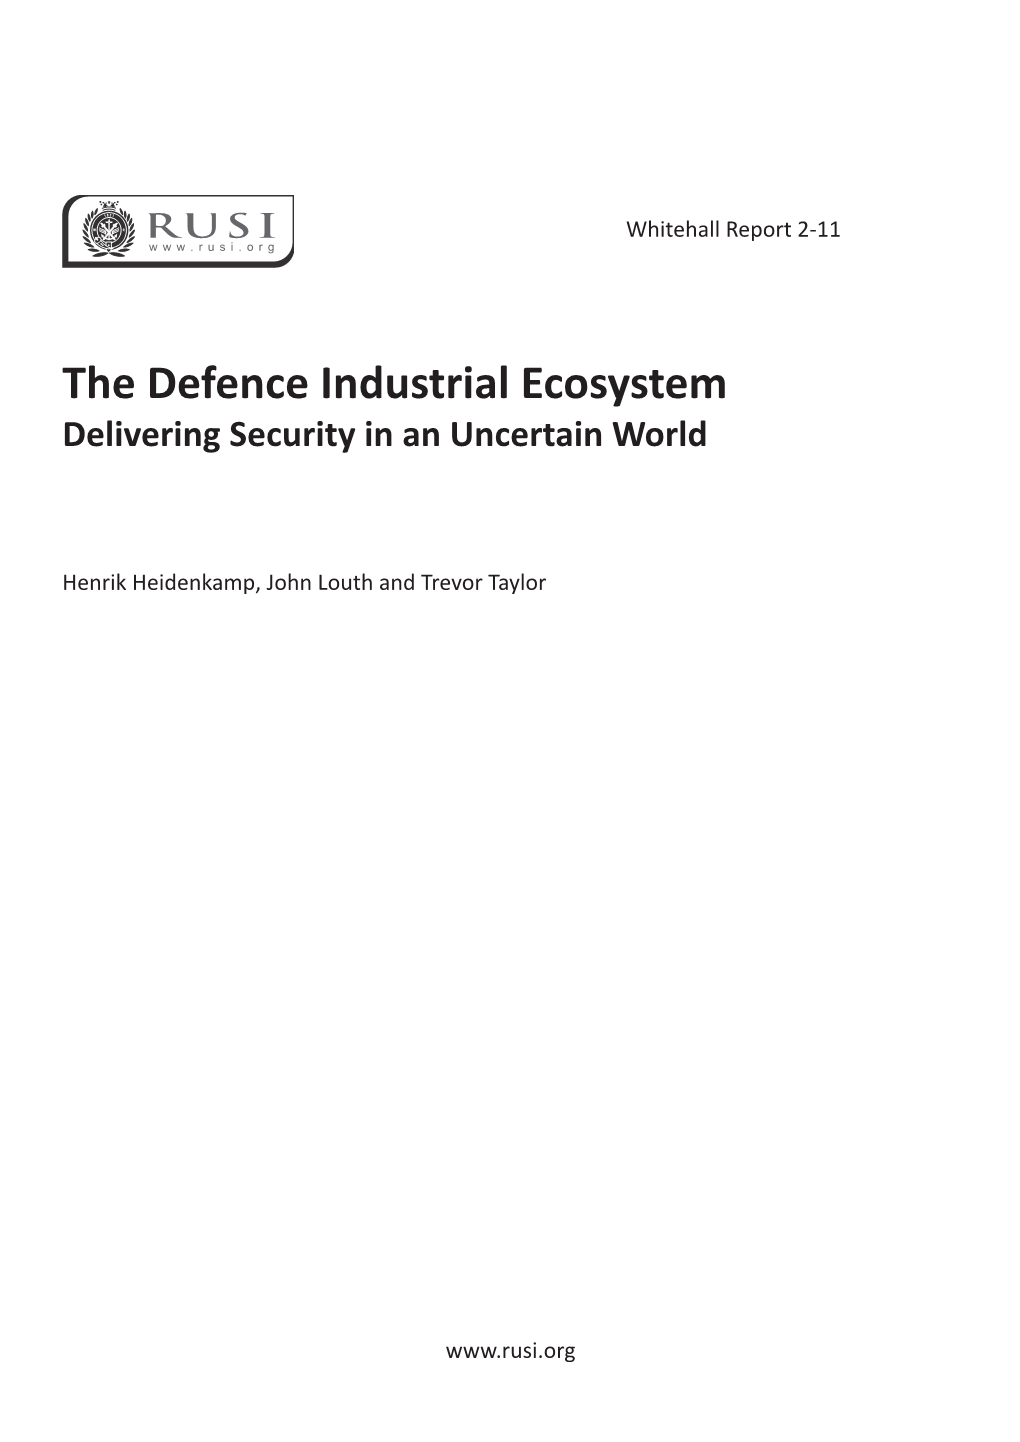 The Defence Industrial Ecosystem Delivering Security in an Uncertain World